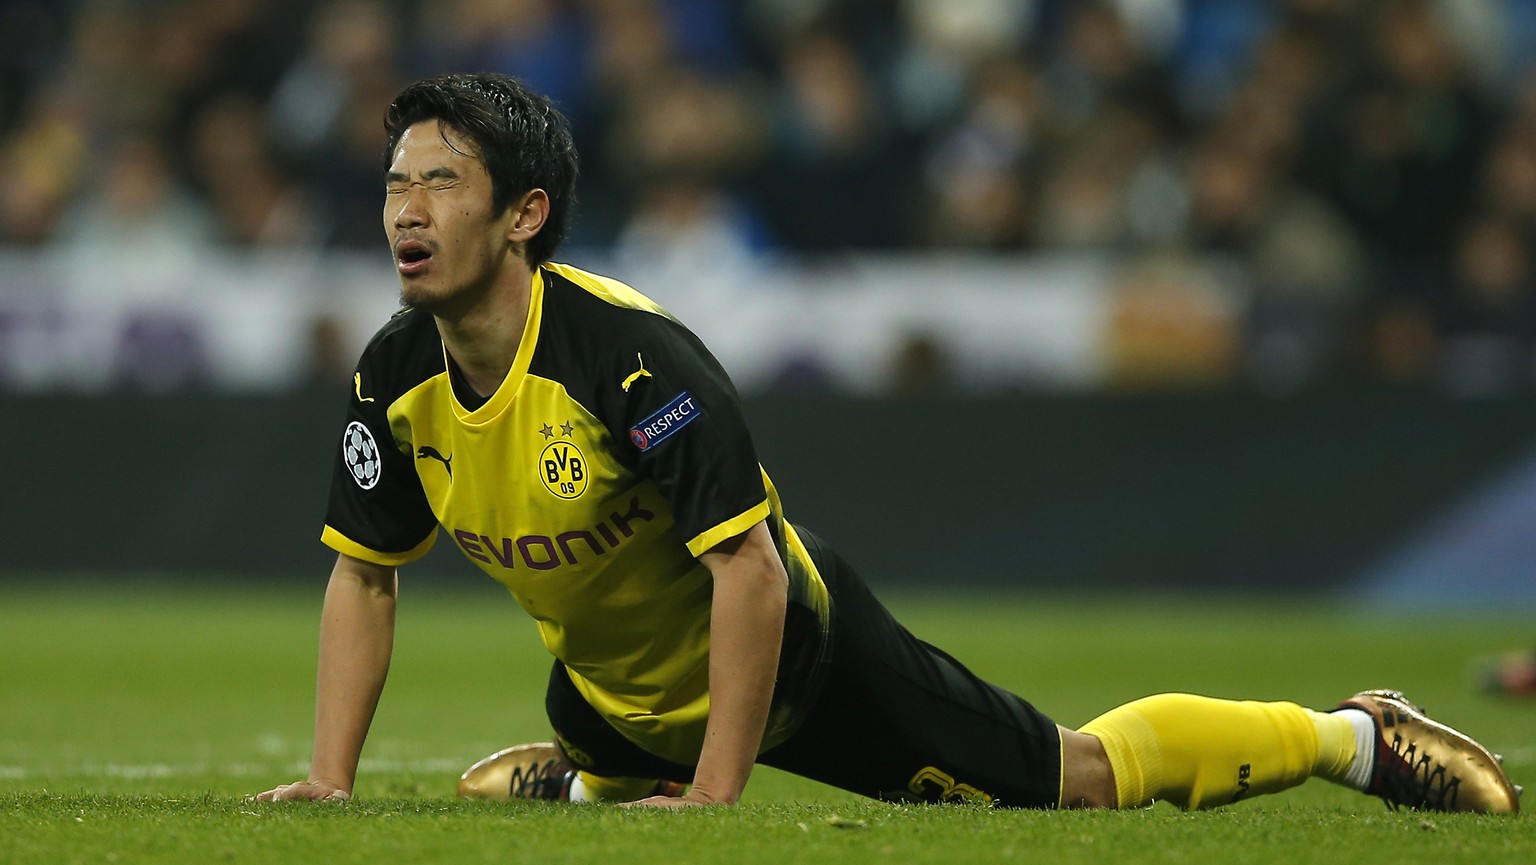 Dortmund&#039;s Shinji Kagawa reacts disappointed during the Champions League Group H soccer match between Real Madrid and Borussia Dortmund at the Santiago Bernabeu stadium in Madrid, Spain, Wednesda ...